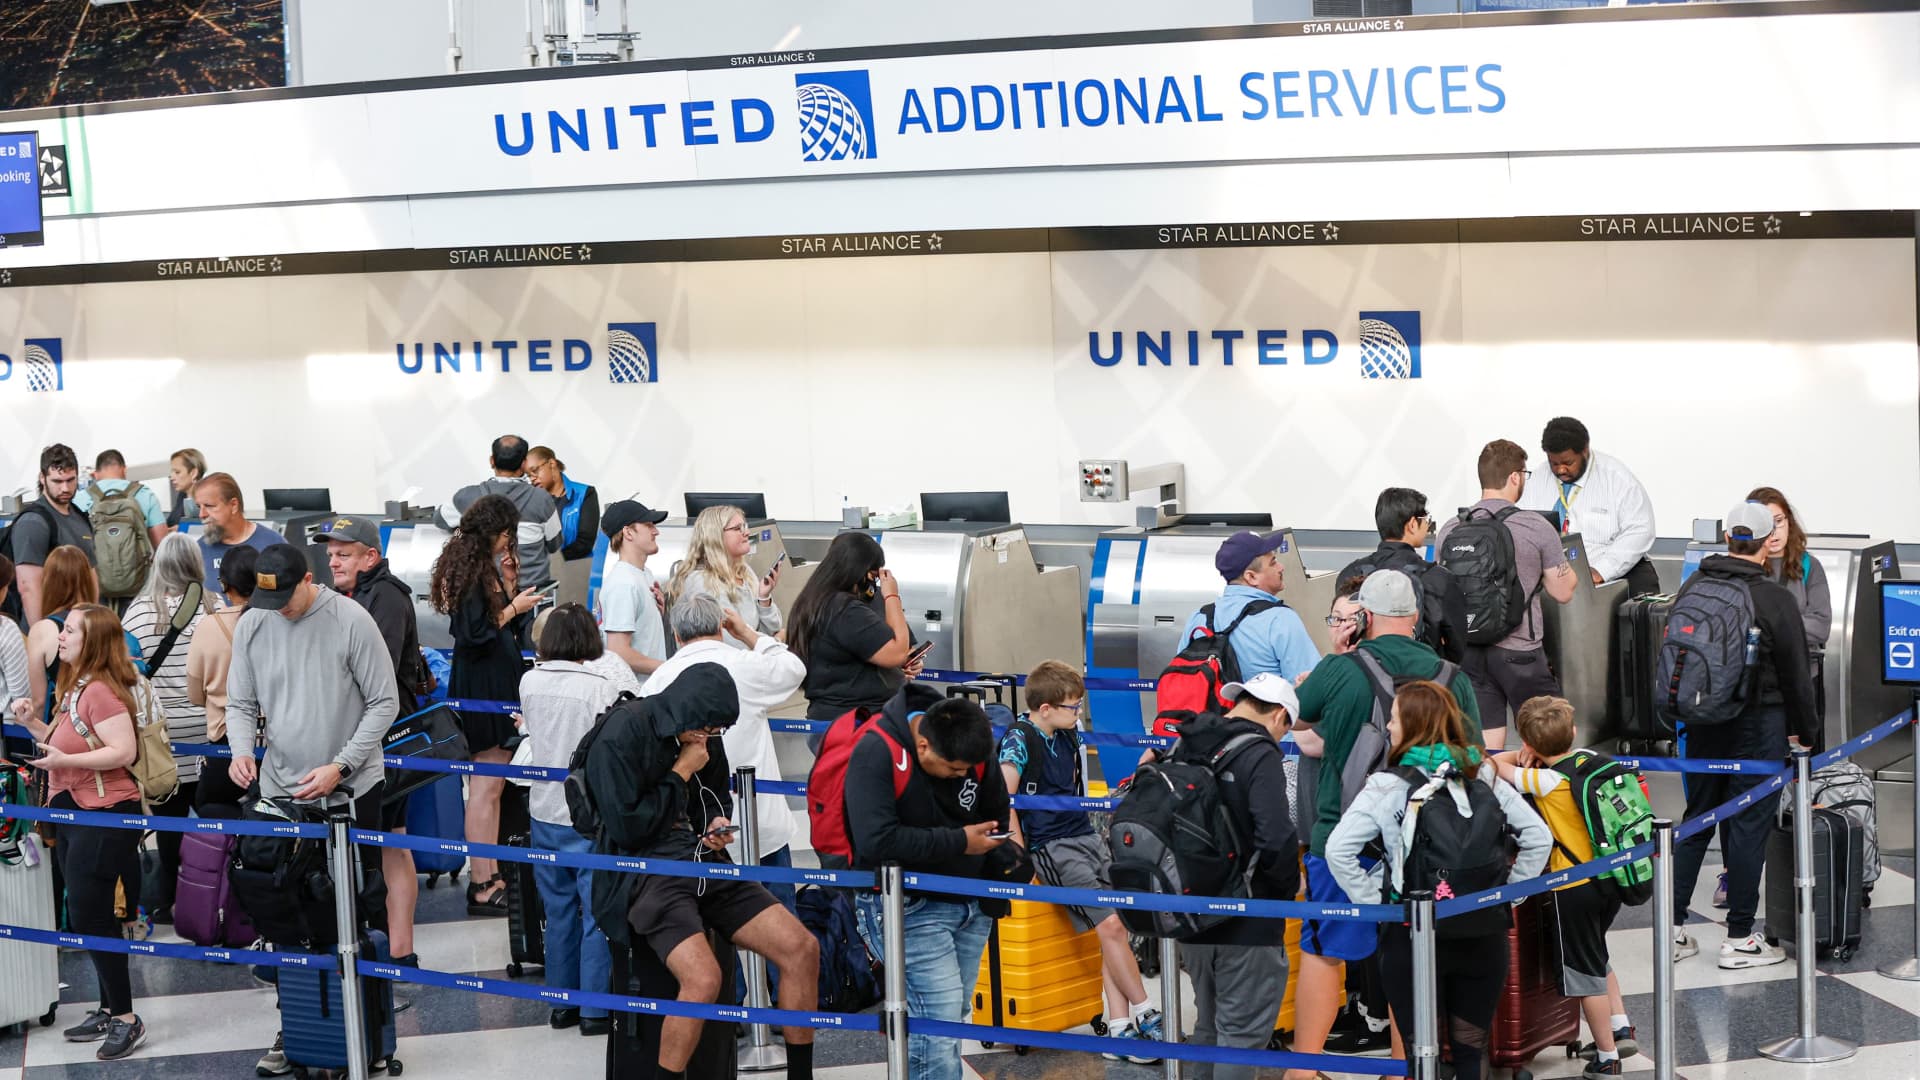 Flight disruptions proceed on height July Fourth scamper day, with United faring the worst